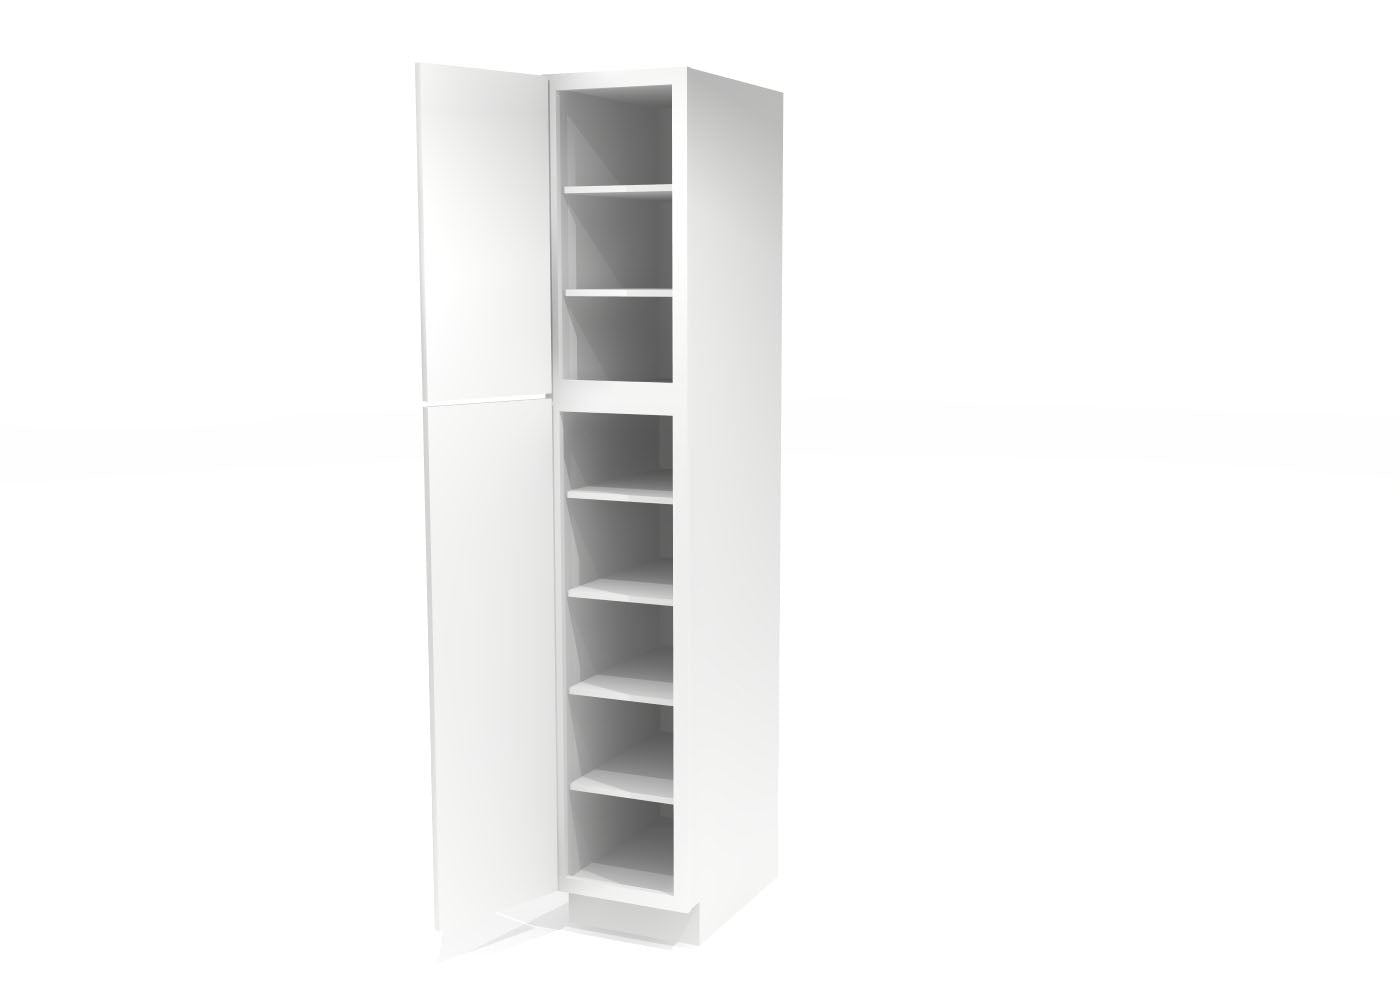 Utility Pantry Single Door 84" by 15" Wide White Shaker Cabinet